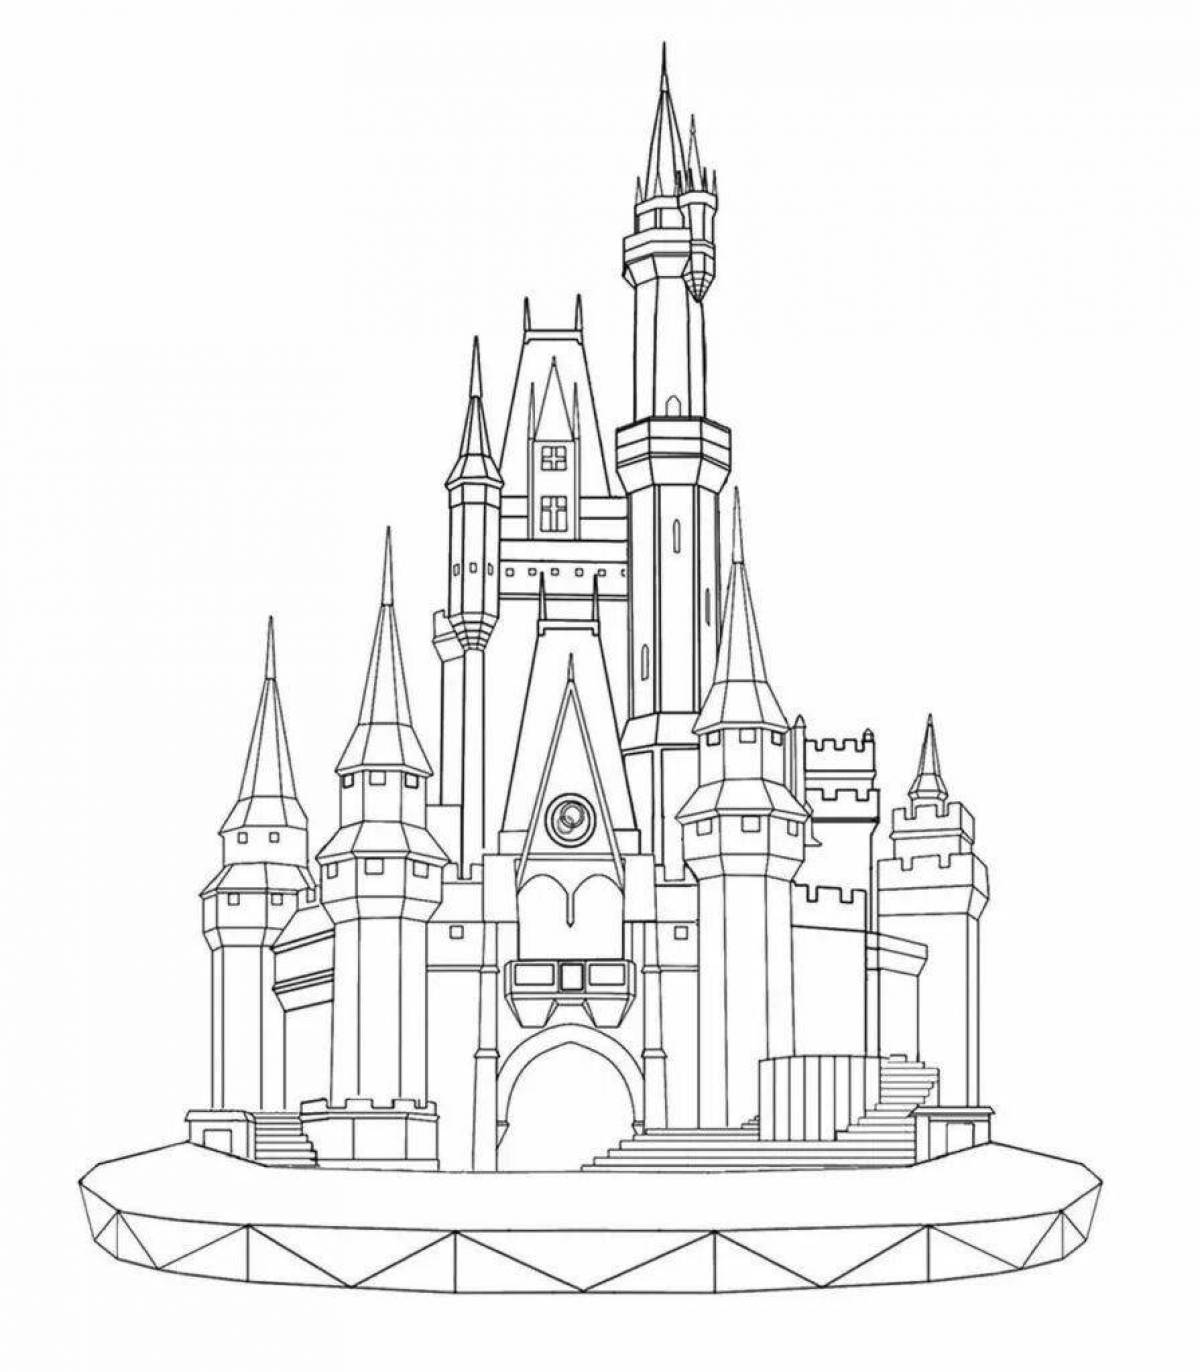 Coloring page of the magnificent palace of the snow queen